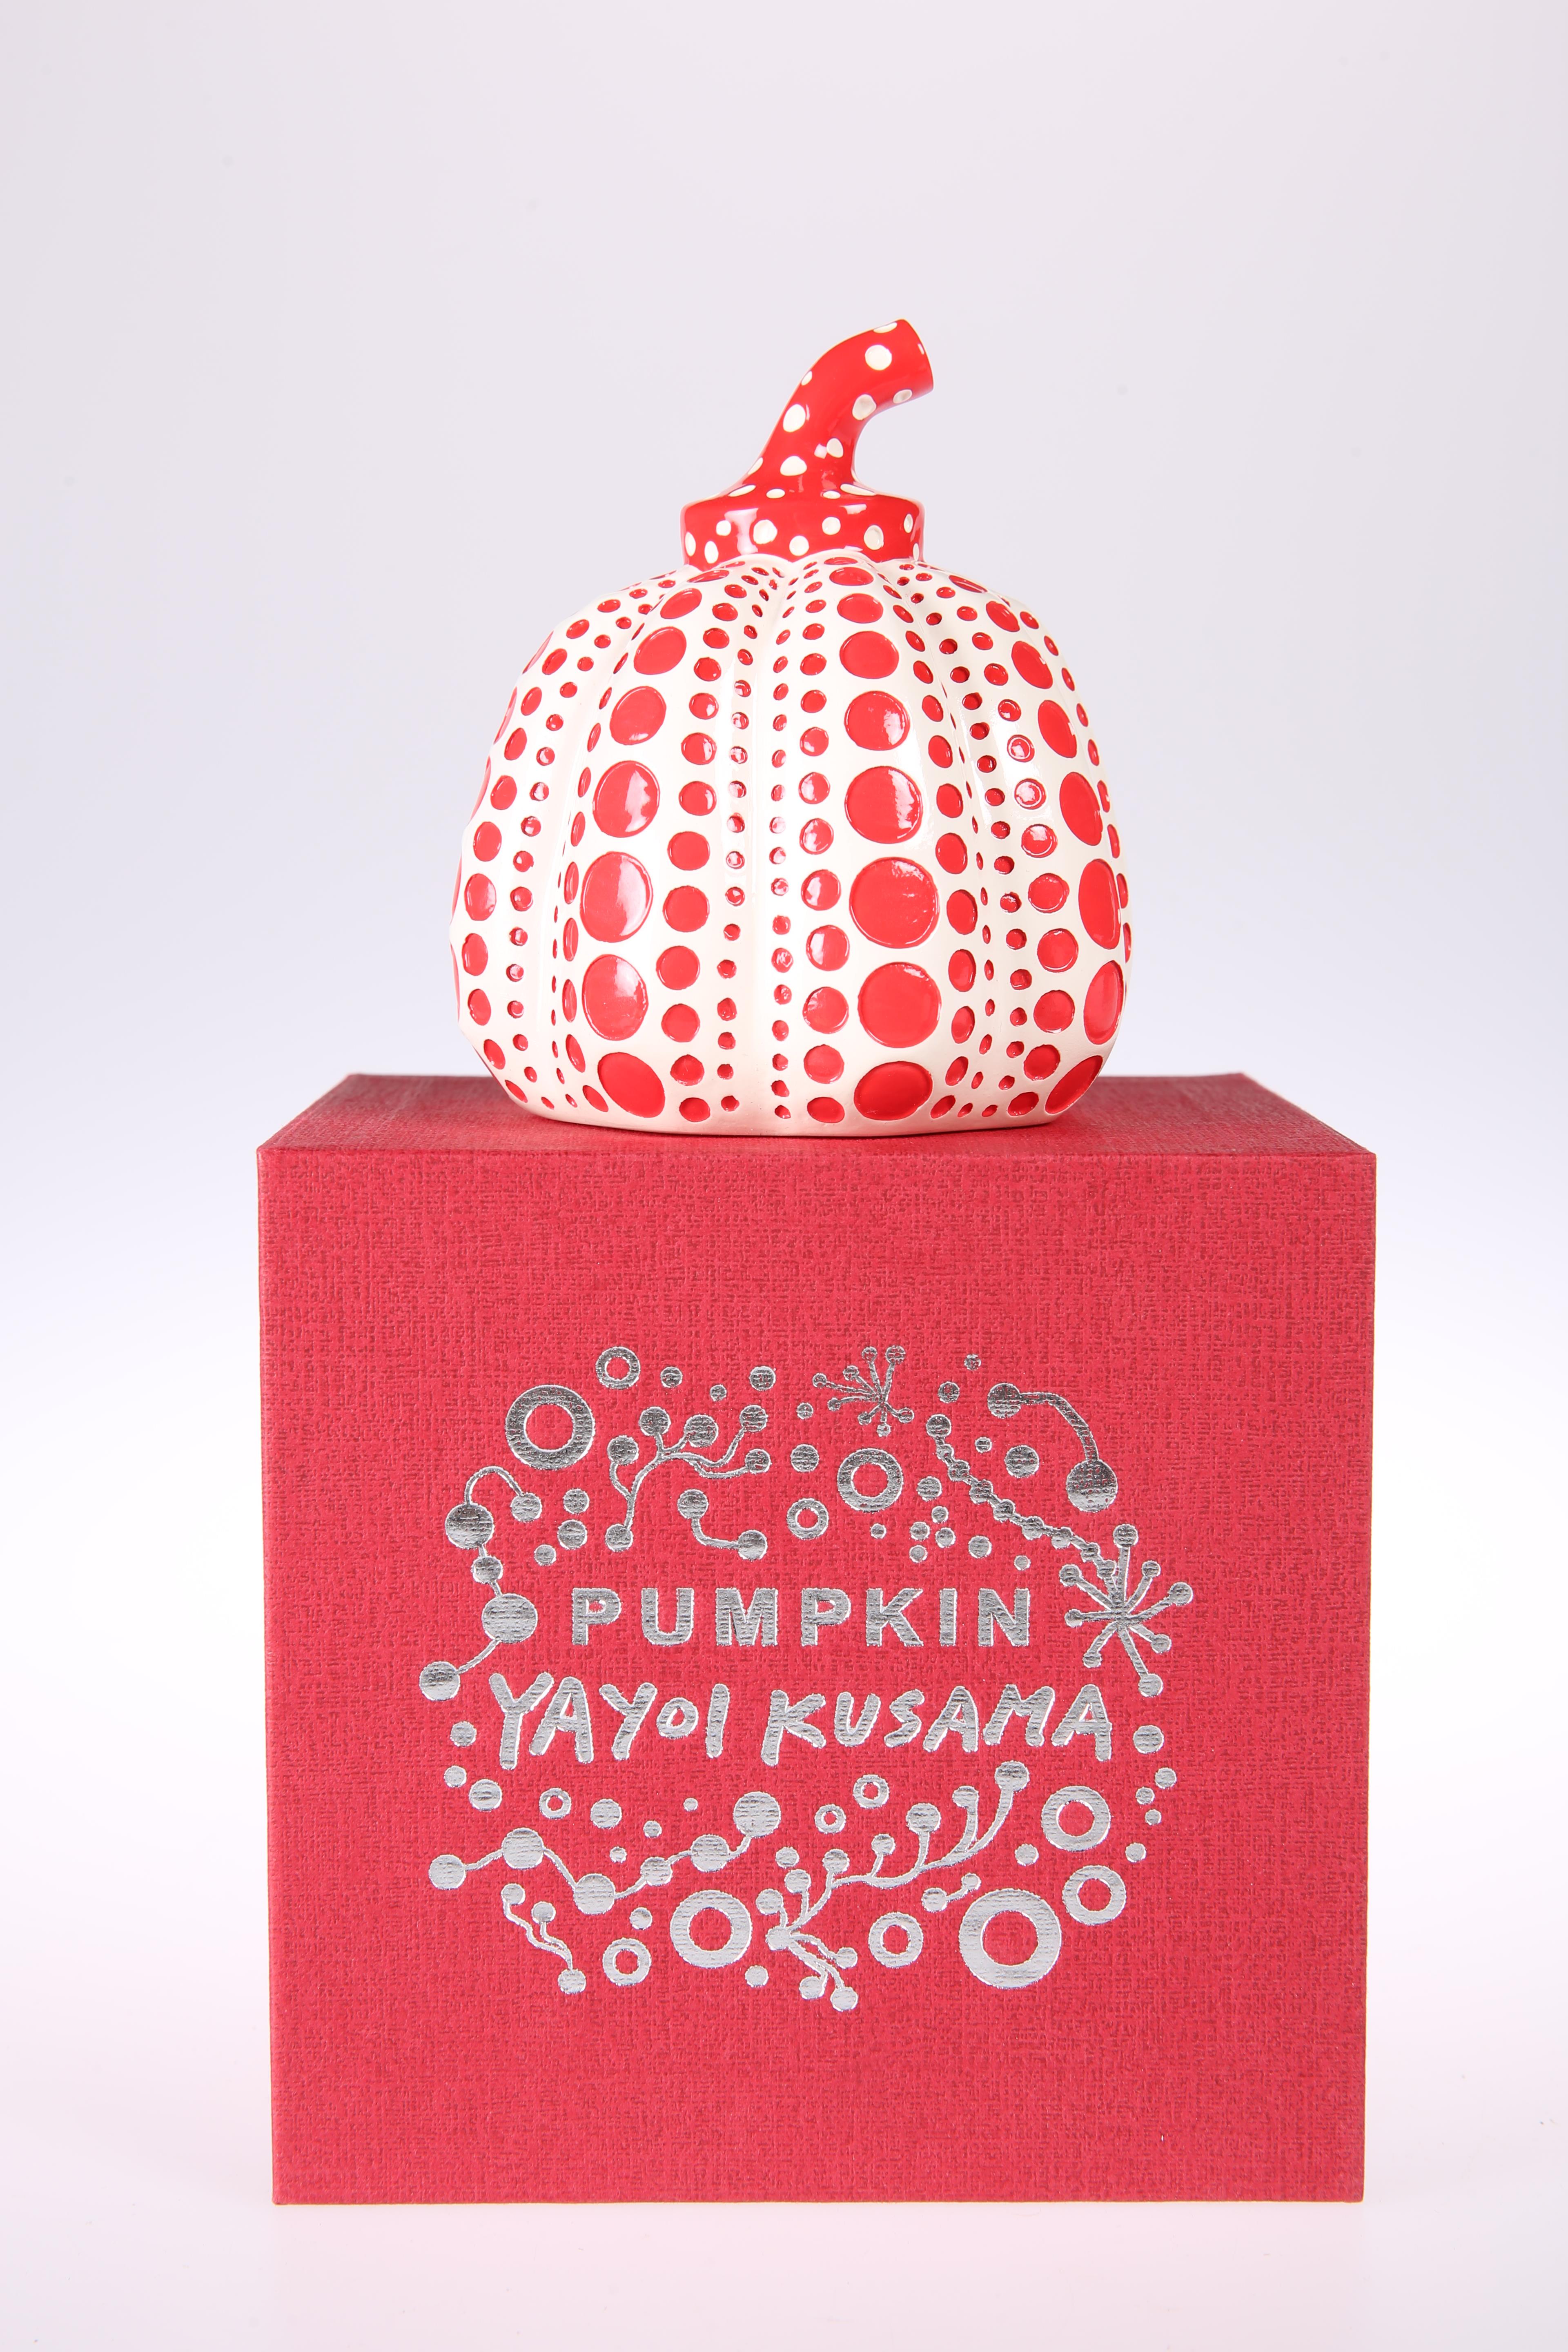 YAYOI KUSAMA (JAPANESE, BORN 1929) 'PUMPKIN' (RED AND WHITE), cast resin sculpture, in